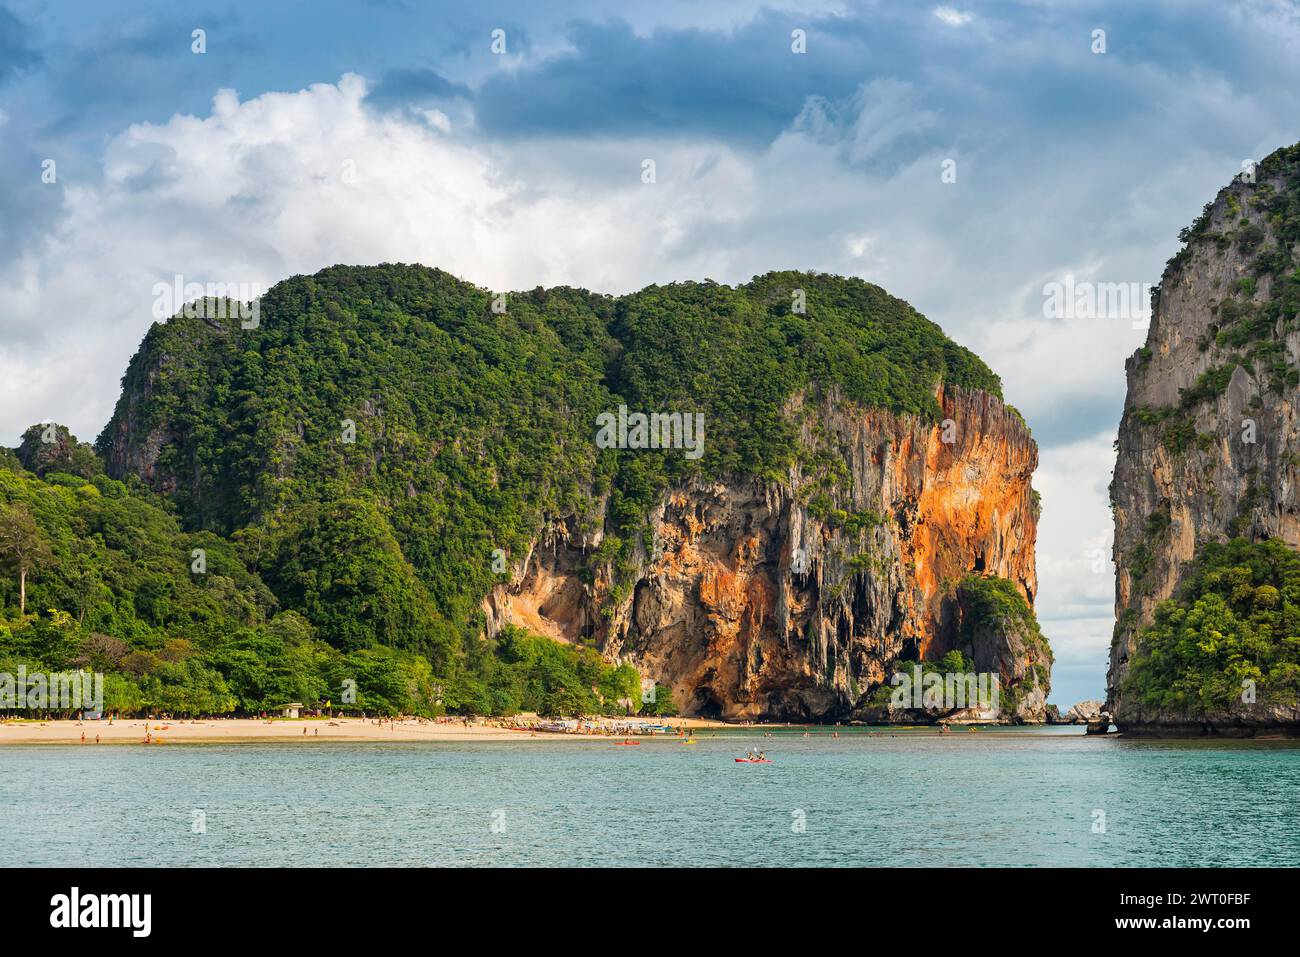 Island landscape near Krabi, stormy sky, thunderstorm, cloudy, weather, sky, storm clouds, nature, force of nature, sea, ocean, island, seascape Stock Photo